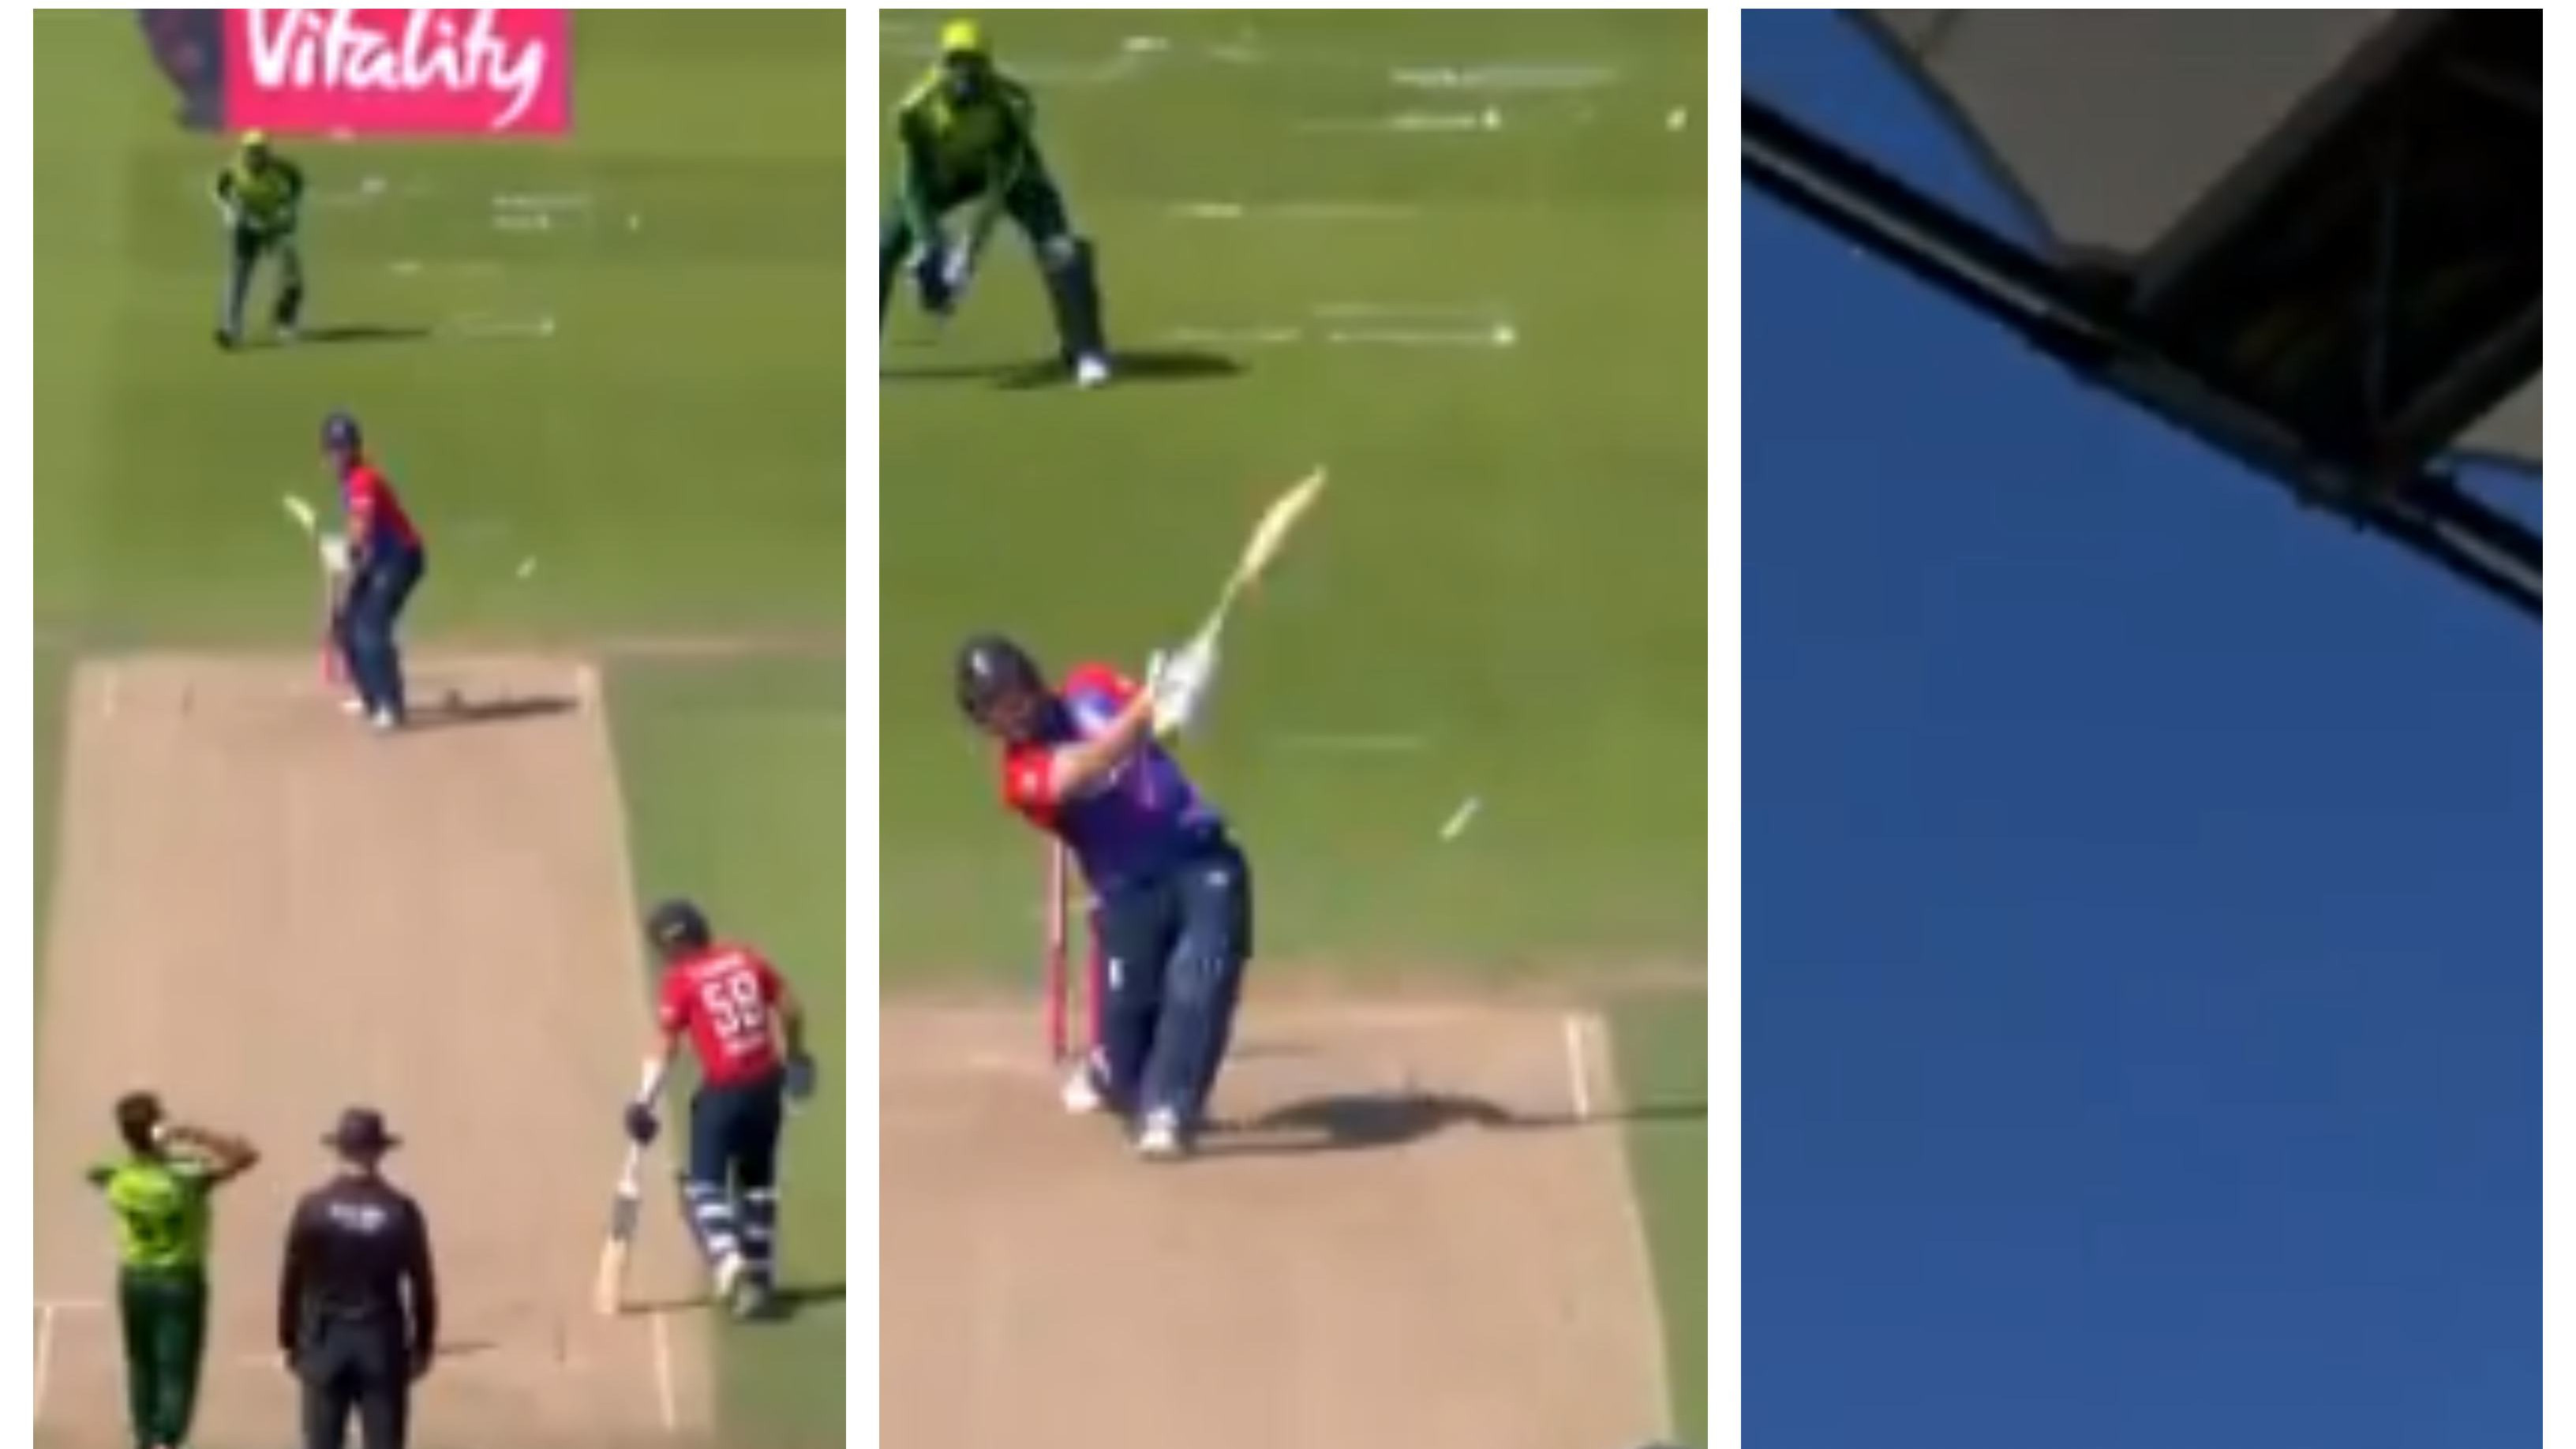 ENG v PAK 2021: WATCH – “Biggest six ever?”, Liam Livingstone smashes Haris Rauf out of the ground